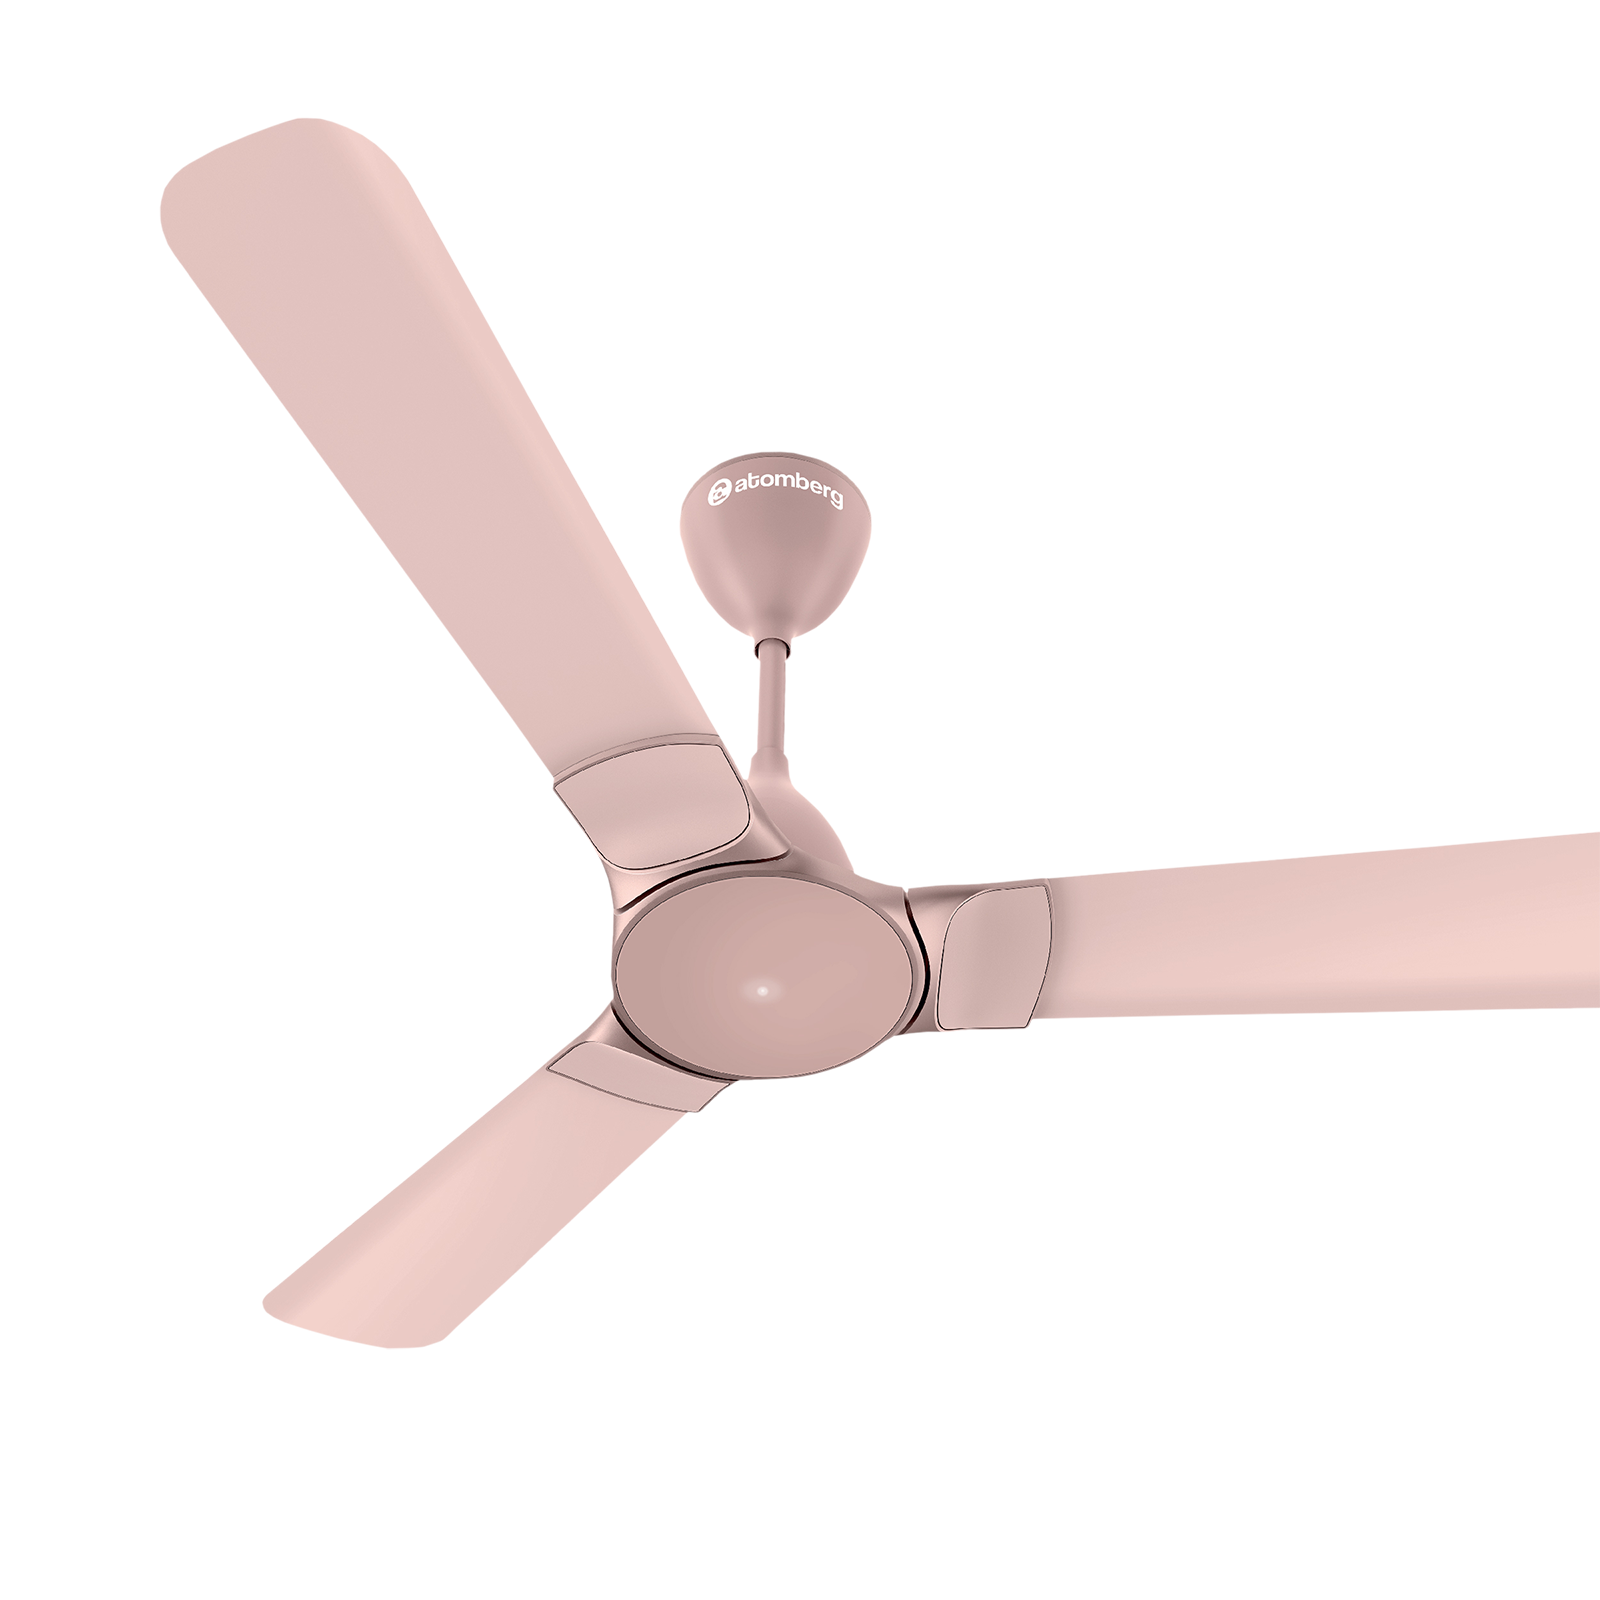 atomberg Erica 5 Star 1200mm 3 Blade BLDC Motor Ceiling Fan with Remote (LED Indicator, Lotus Pink)